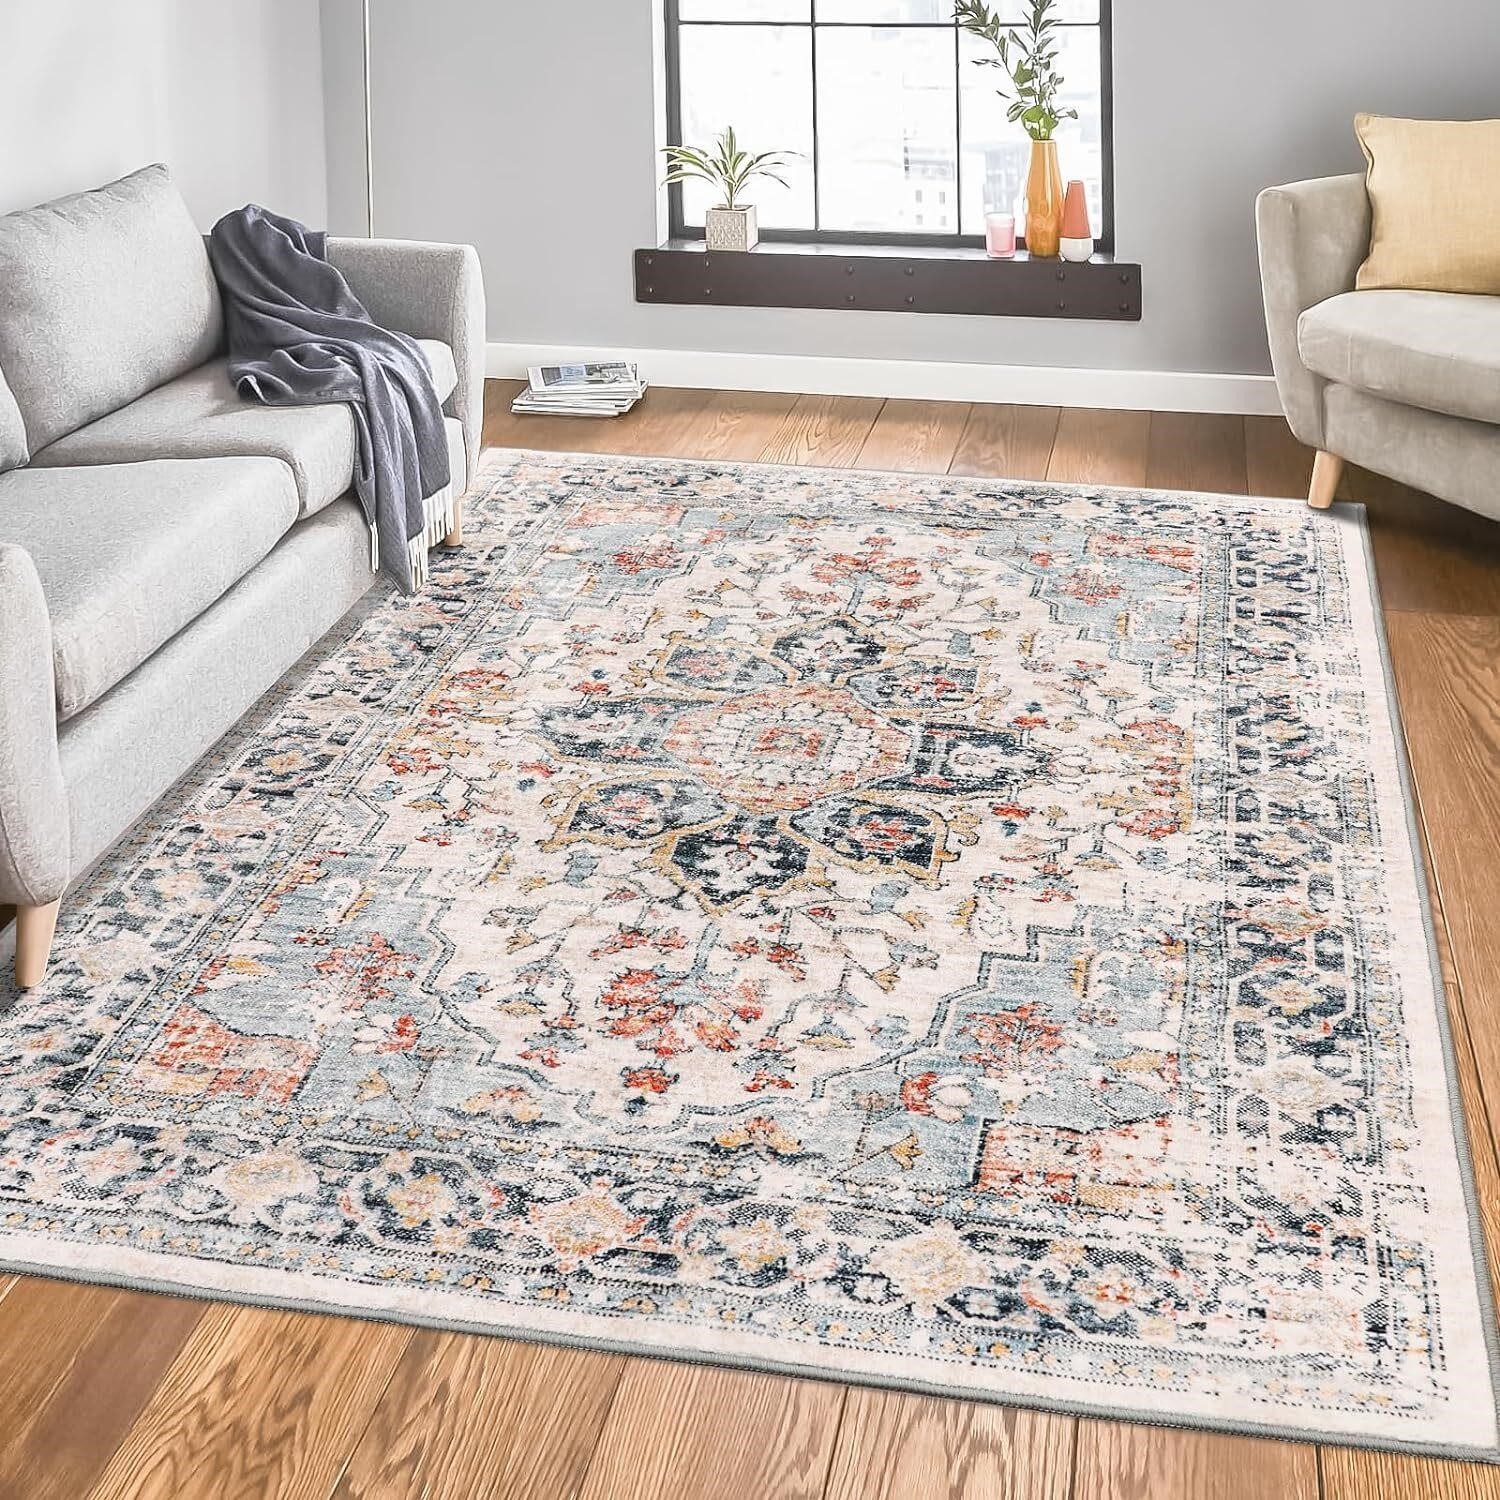 LUX XD Area Rugs  Soft Touch  8x10ft